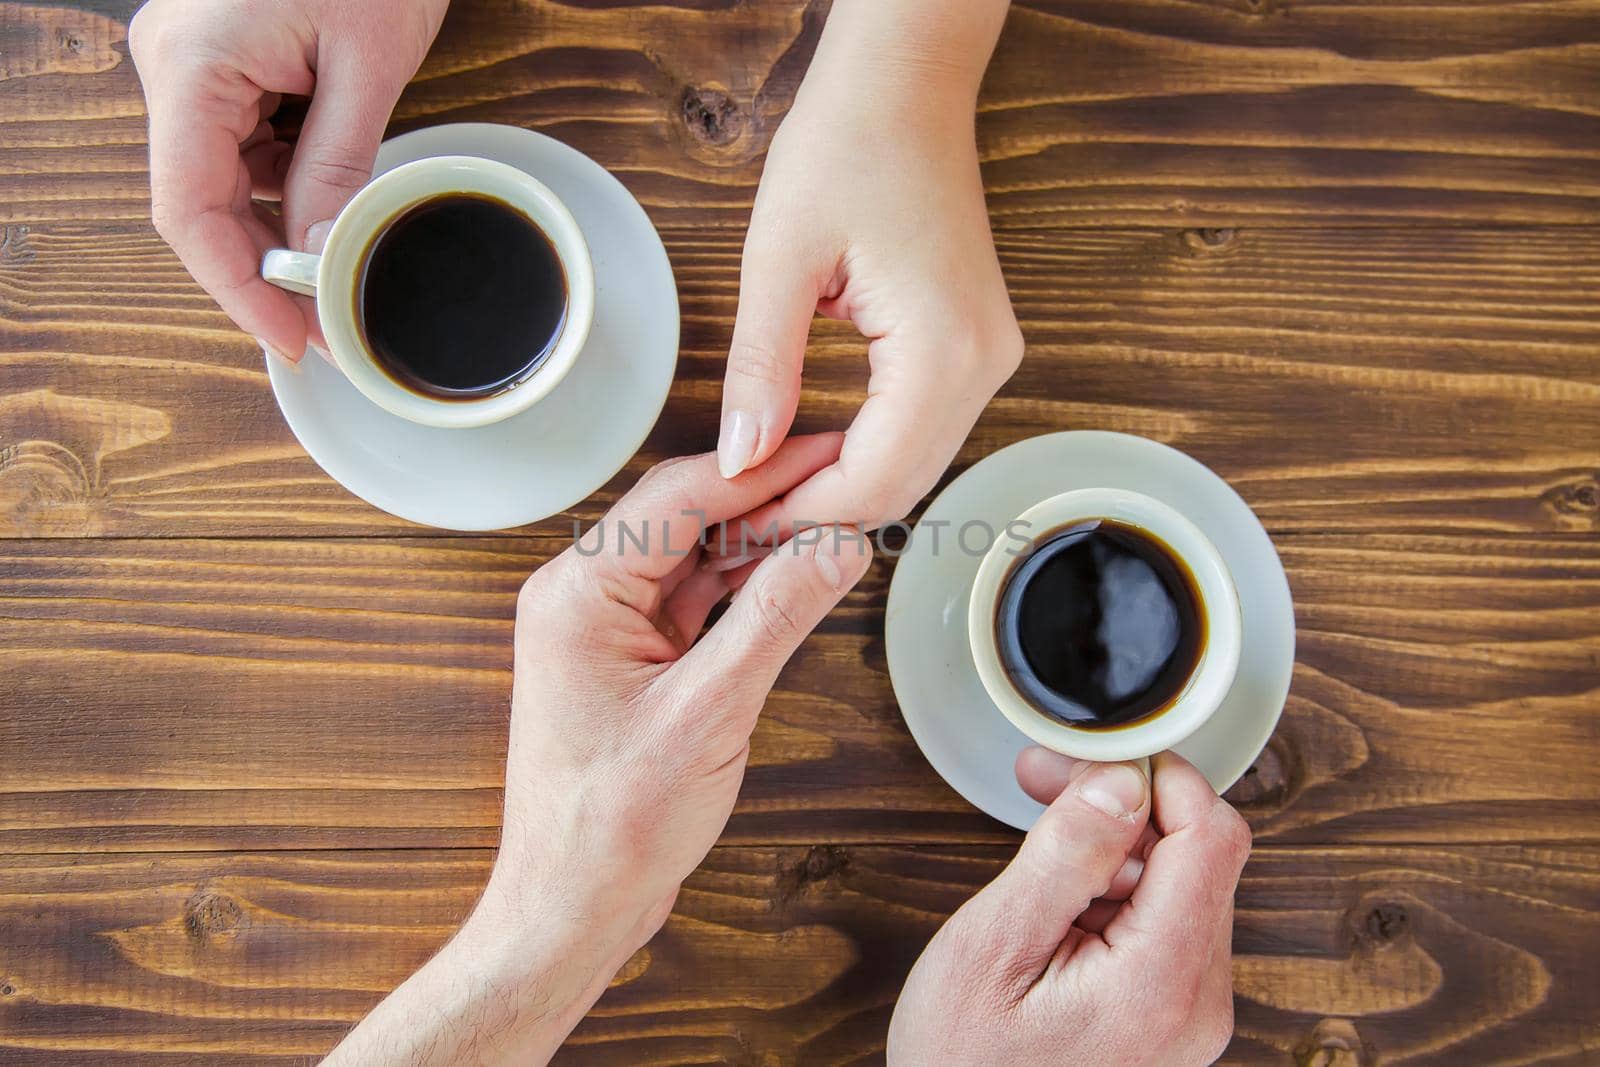 Cups with a coffee in the hands of men and women.